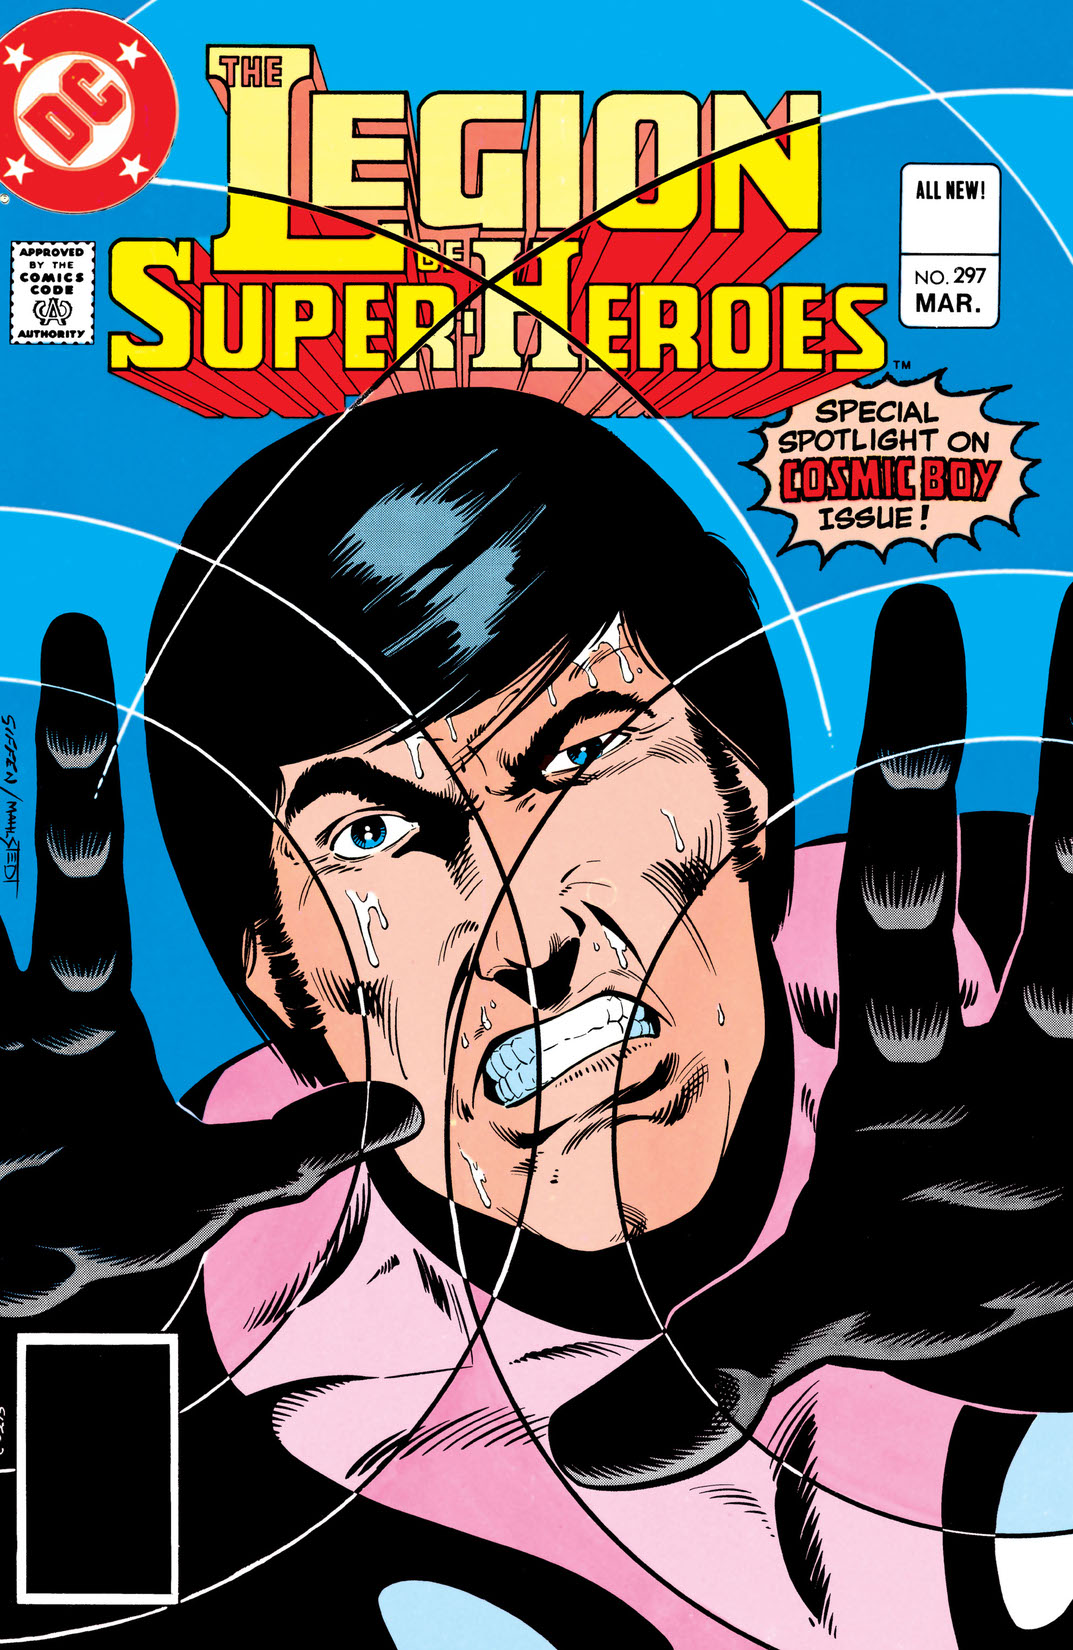 The Legion of Super-Heroes (1980-) #297 preview images